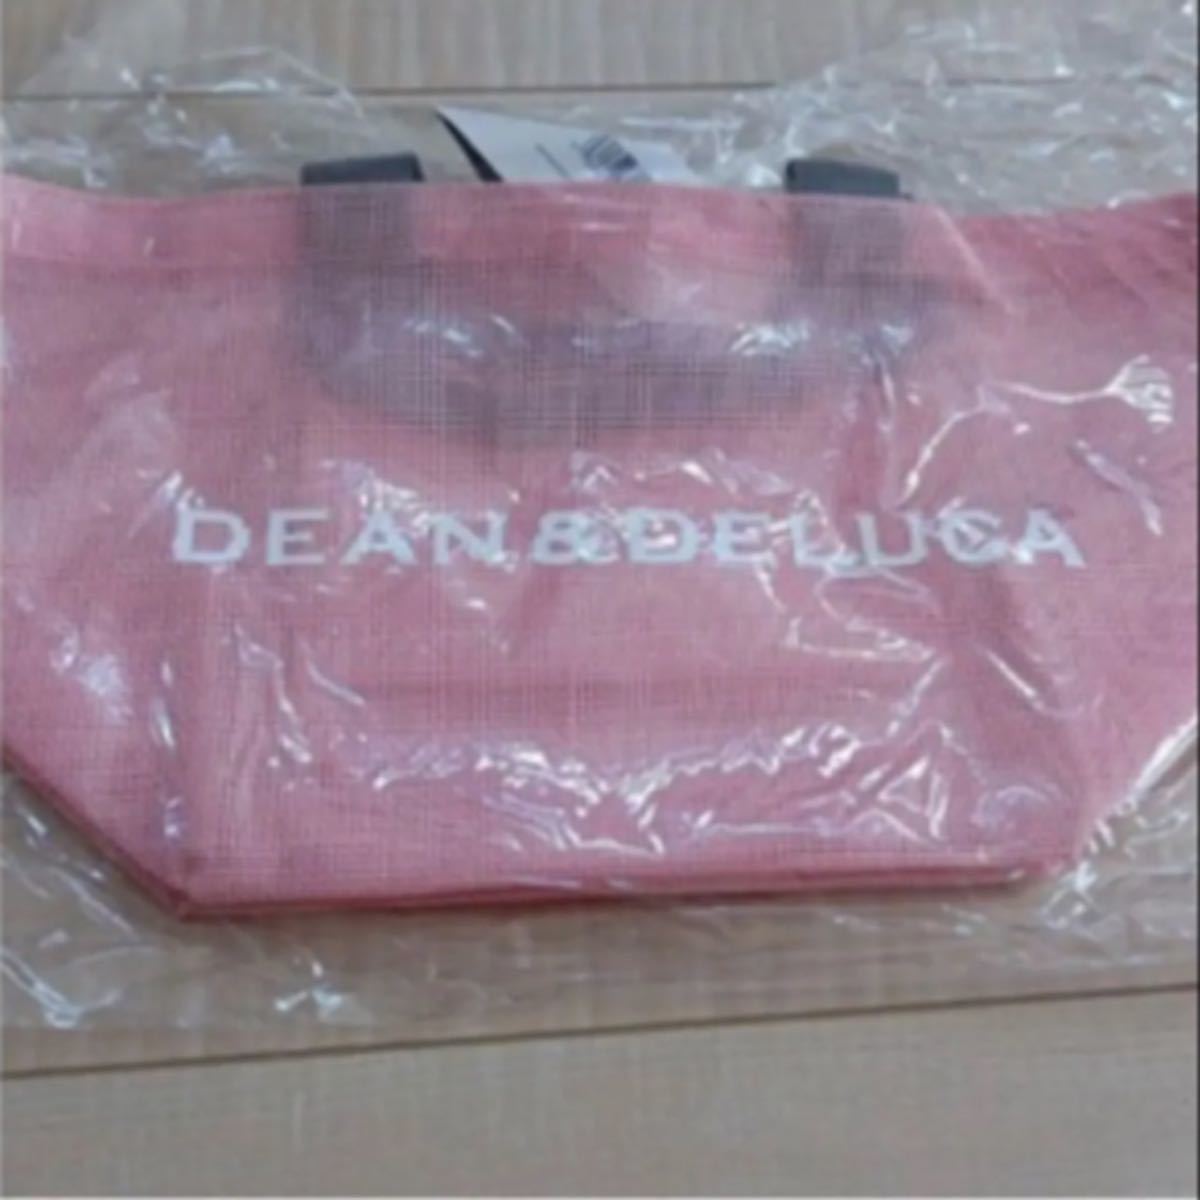 DEAN&DELUCA ディーン＆デルーカ メッシュトートバッグ ピンク S トートバッグ